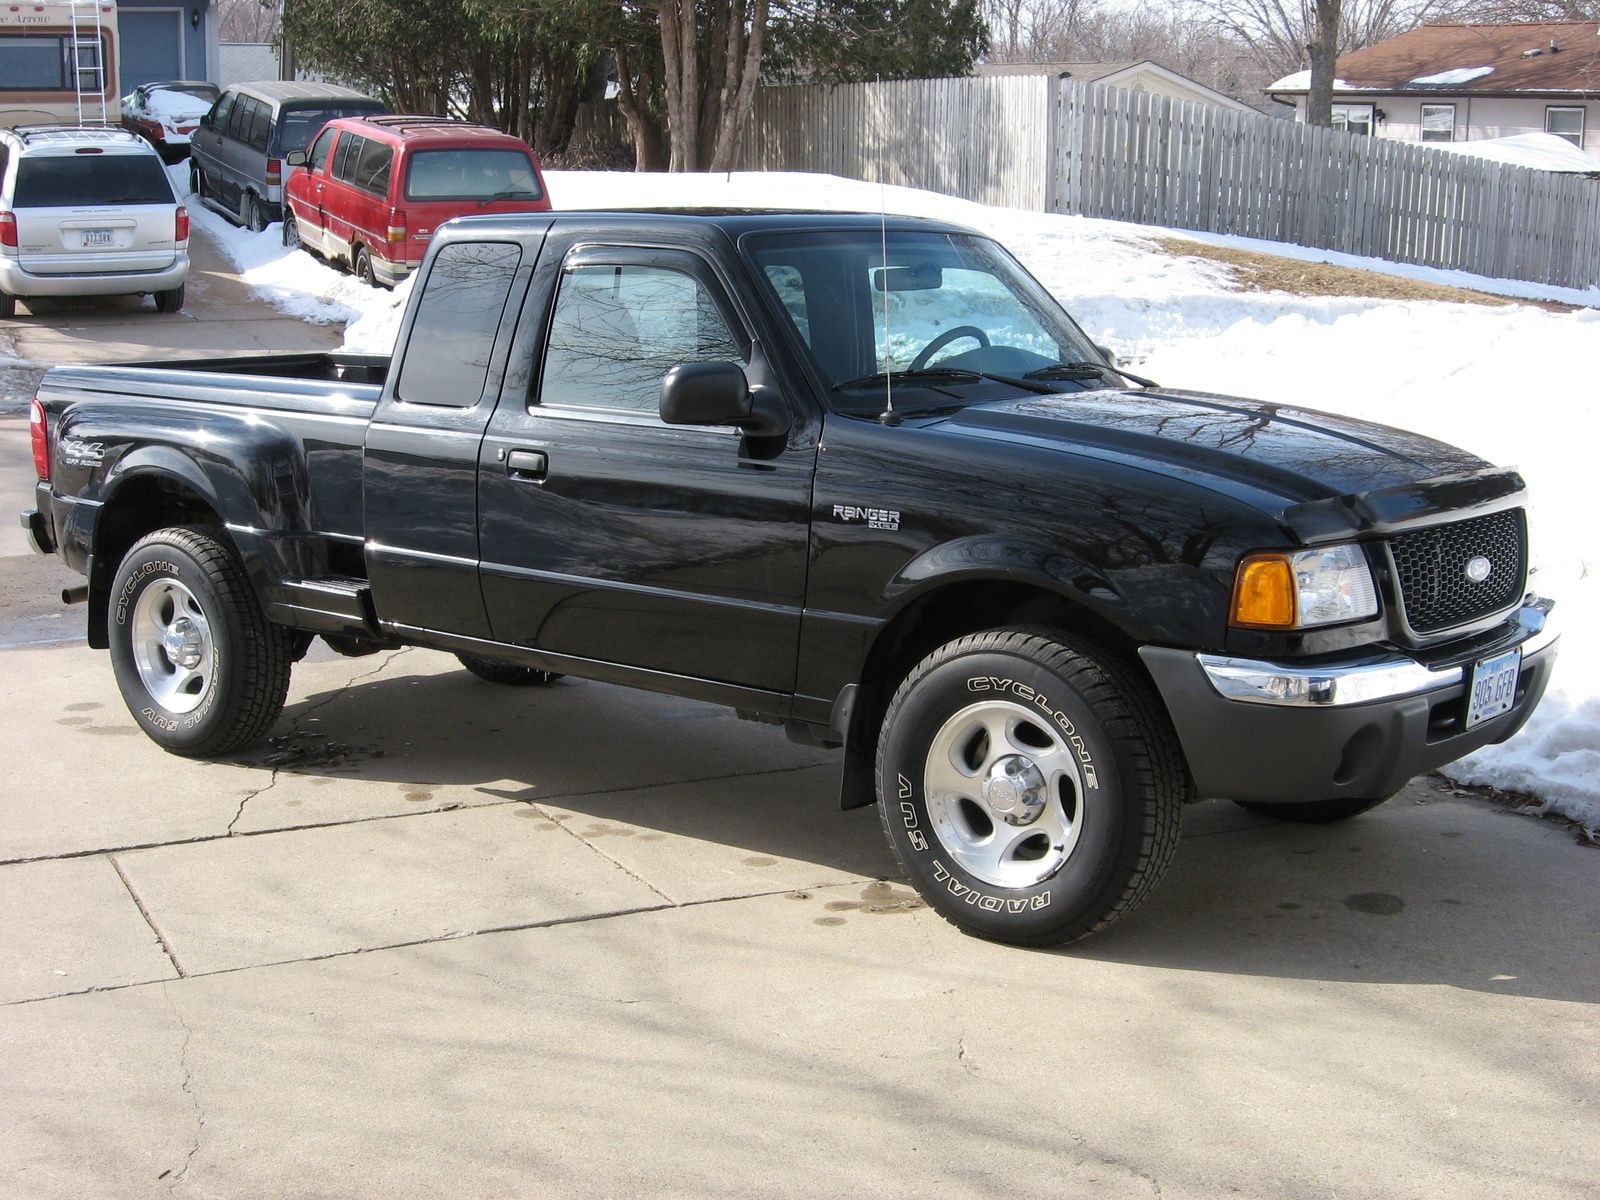 2004 Ford Ranger 4wd Extended Cab Edge 0 60 Times Top Speed Specs